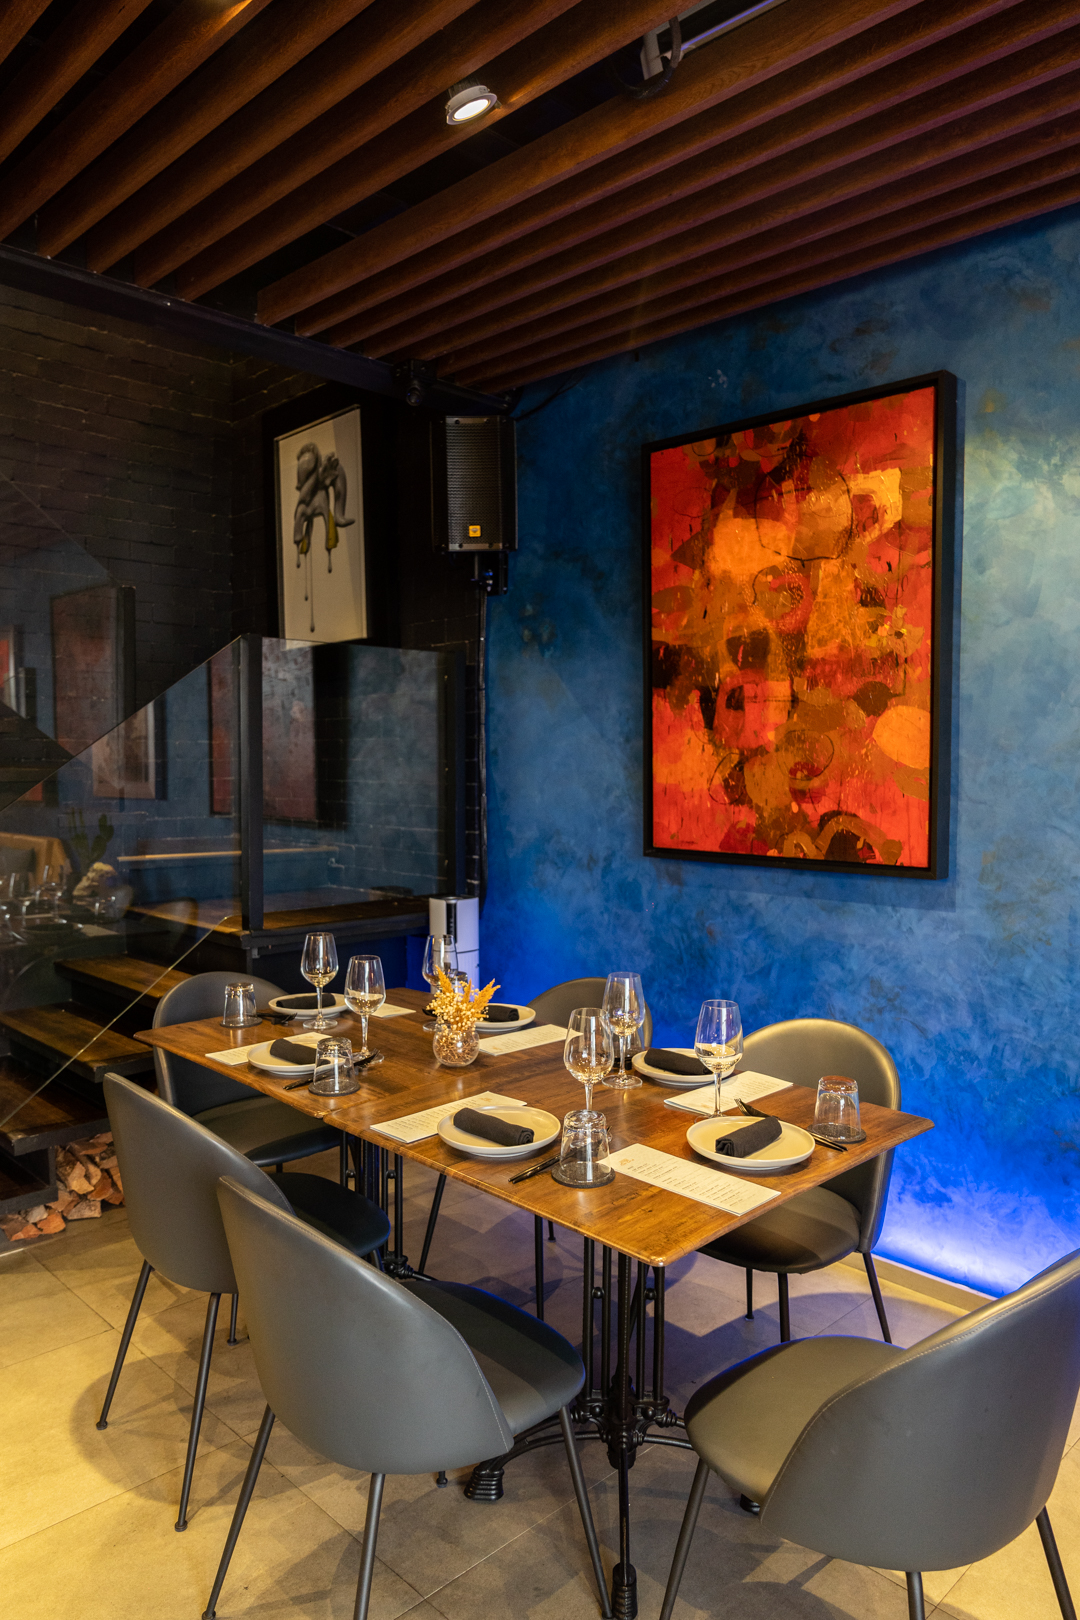 Tucking into the Alegria Cantina dishes is like spending time at home with the space's homey yet lively interiors